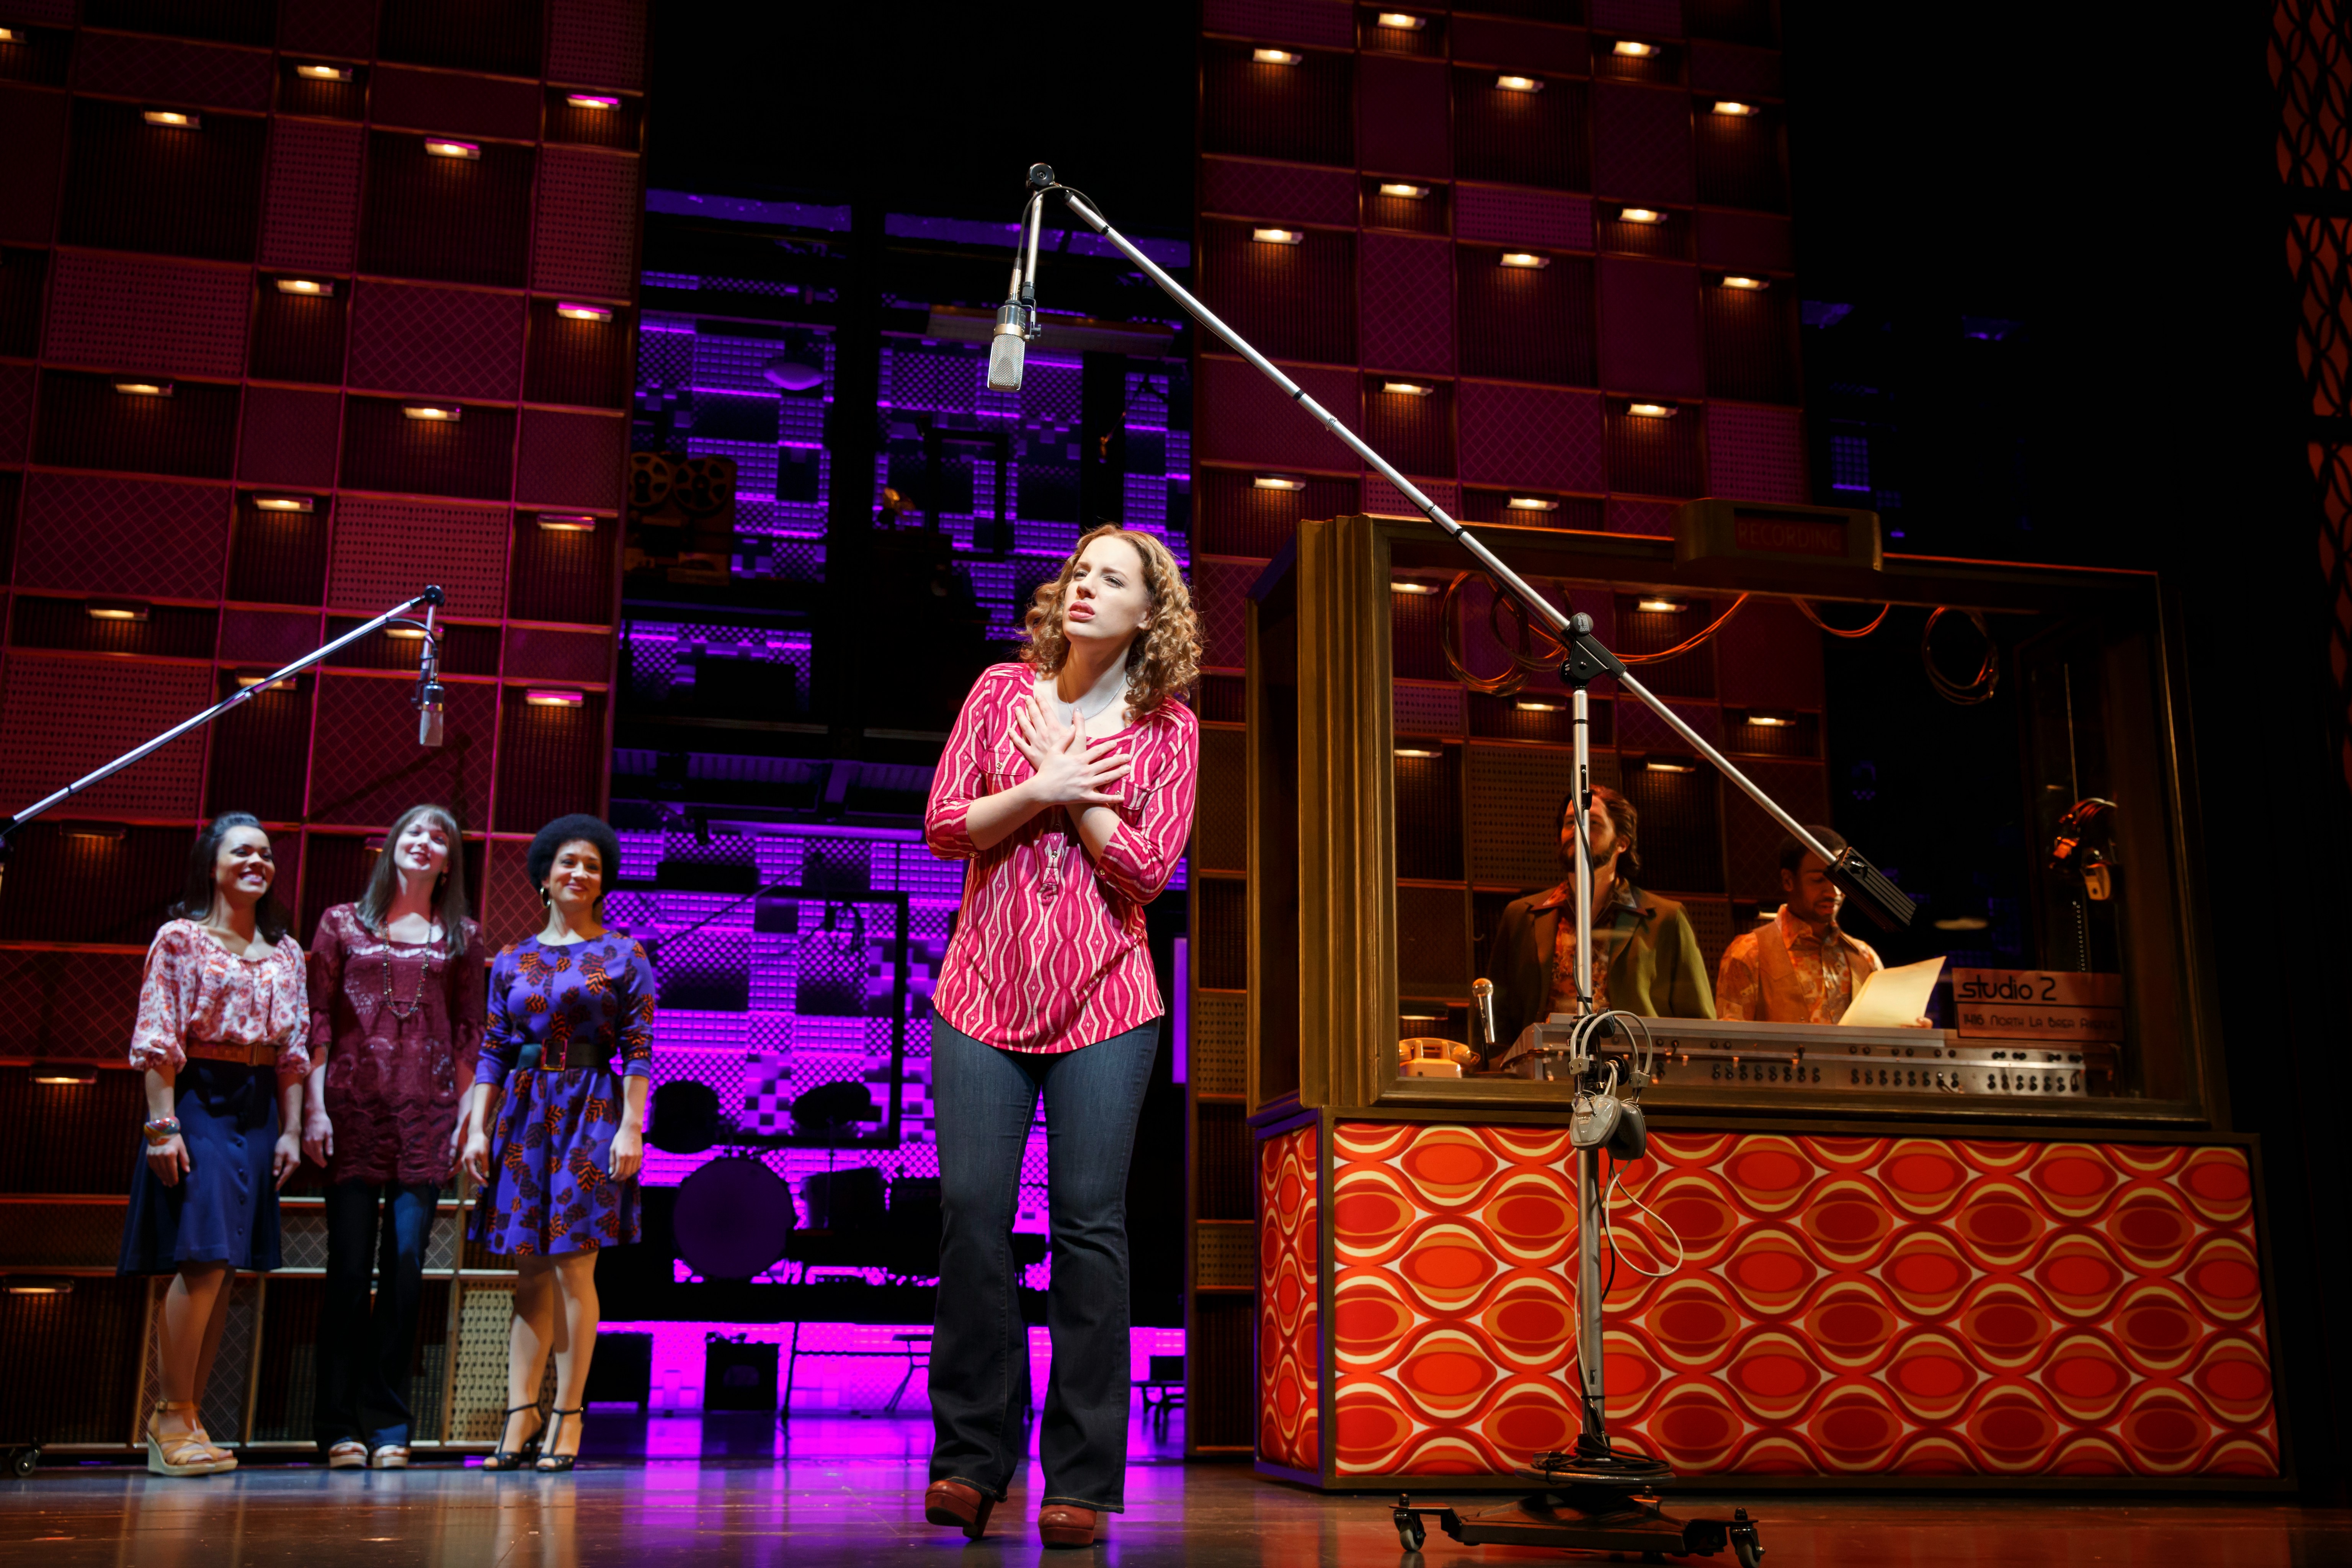 Broadway In Chicago Announces Open Casting Call for Lead In Tour of BEAUTIFUL-THE CAROLE KING MUSICAL 1 Broadway In Chicago is pleased to announce that producers Paul Blake and Sony/ATV Music Publishing will be holding a nationwide open casting call for the most sought-after role on Broadway, the title role in BEAUTIFUL—The Carole King Musical, about the early life and career of the legendary and groundbreaking singer/songwriter. The show’s casting directors will hold an open call for ‘Carole King’ and other cast members for the Broadway, touring and international productions of the smash hit musical in Chicago at the Actors’ Equity Building (557 West Randolph Street) on Saturday, February 28.  